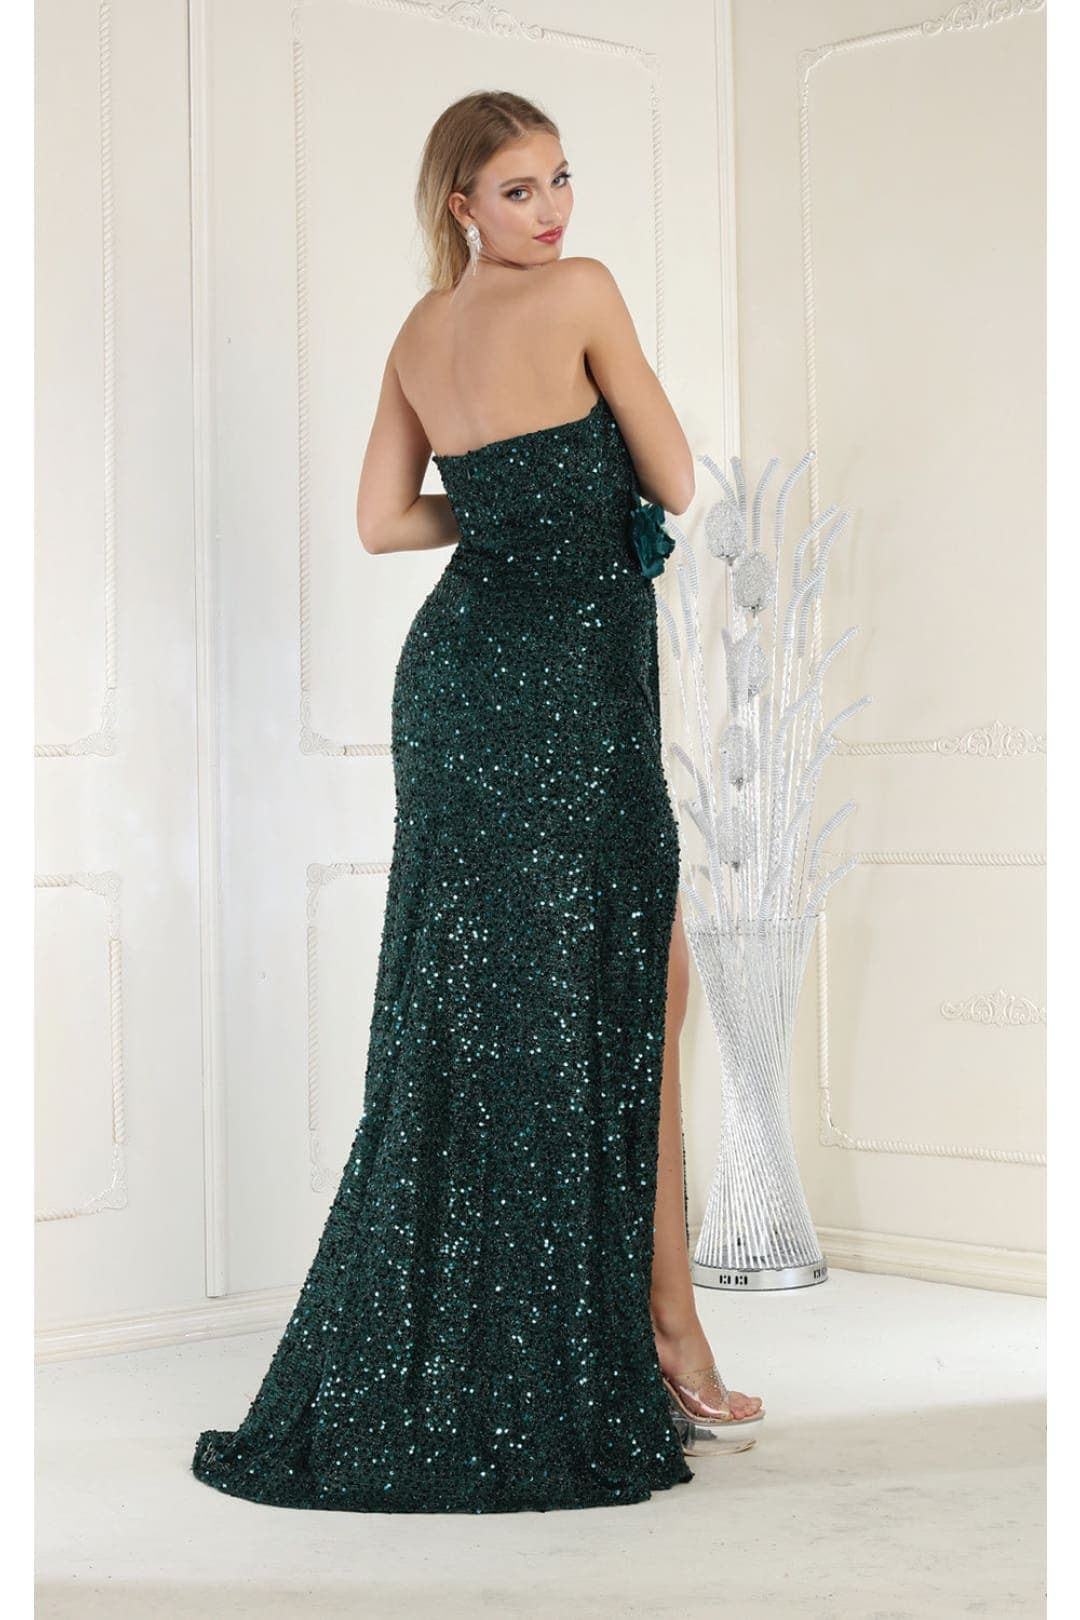 May Queen MQ1968 Strapless Sequined Formal Gown - Dress